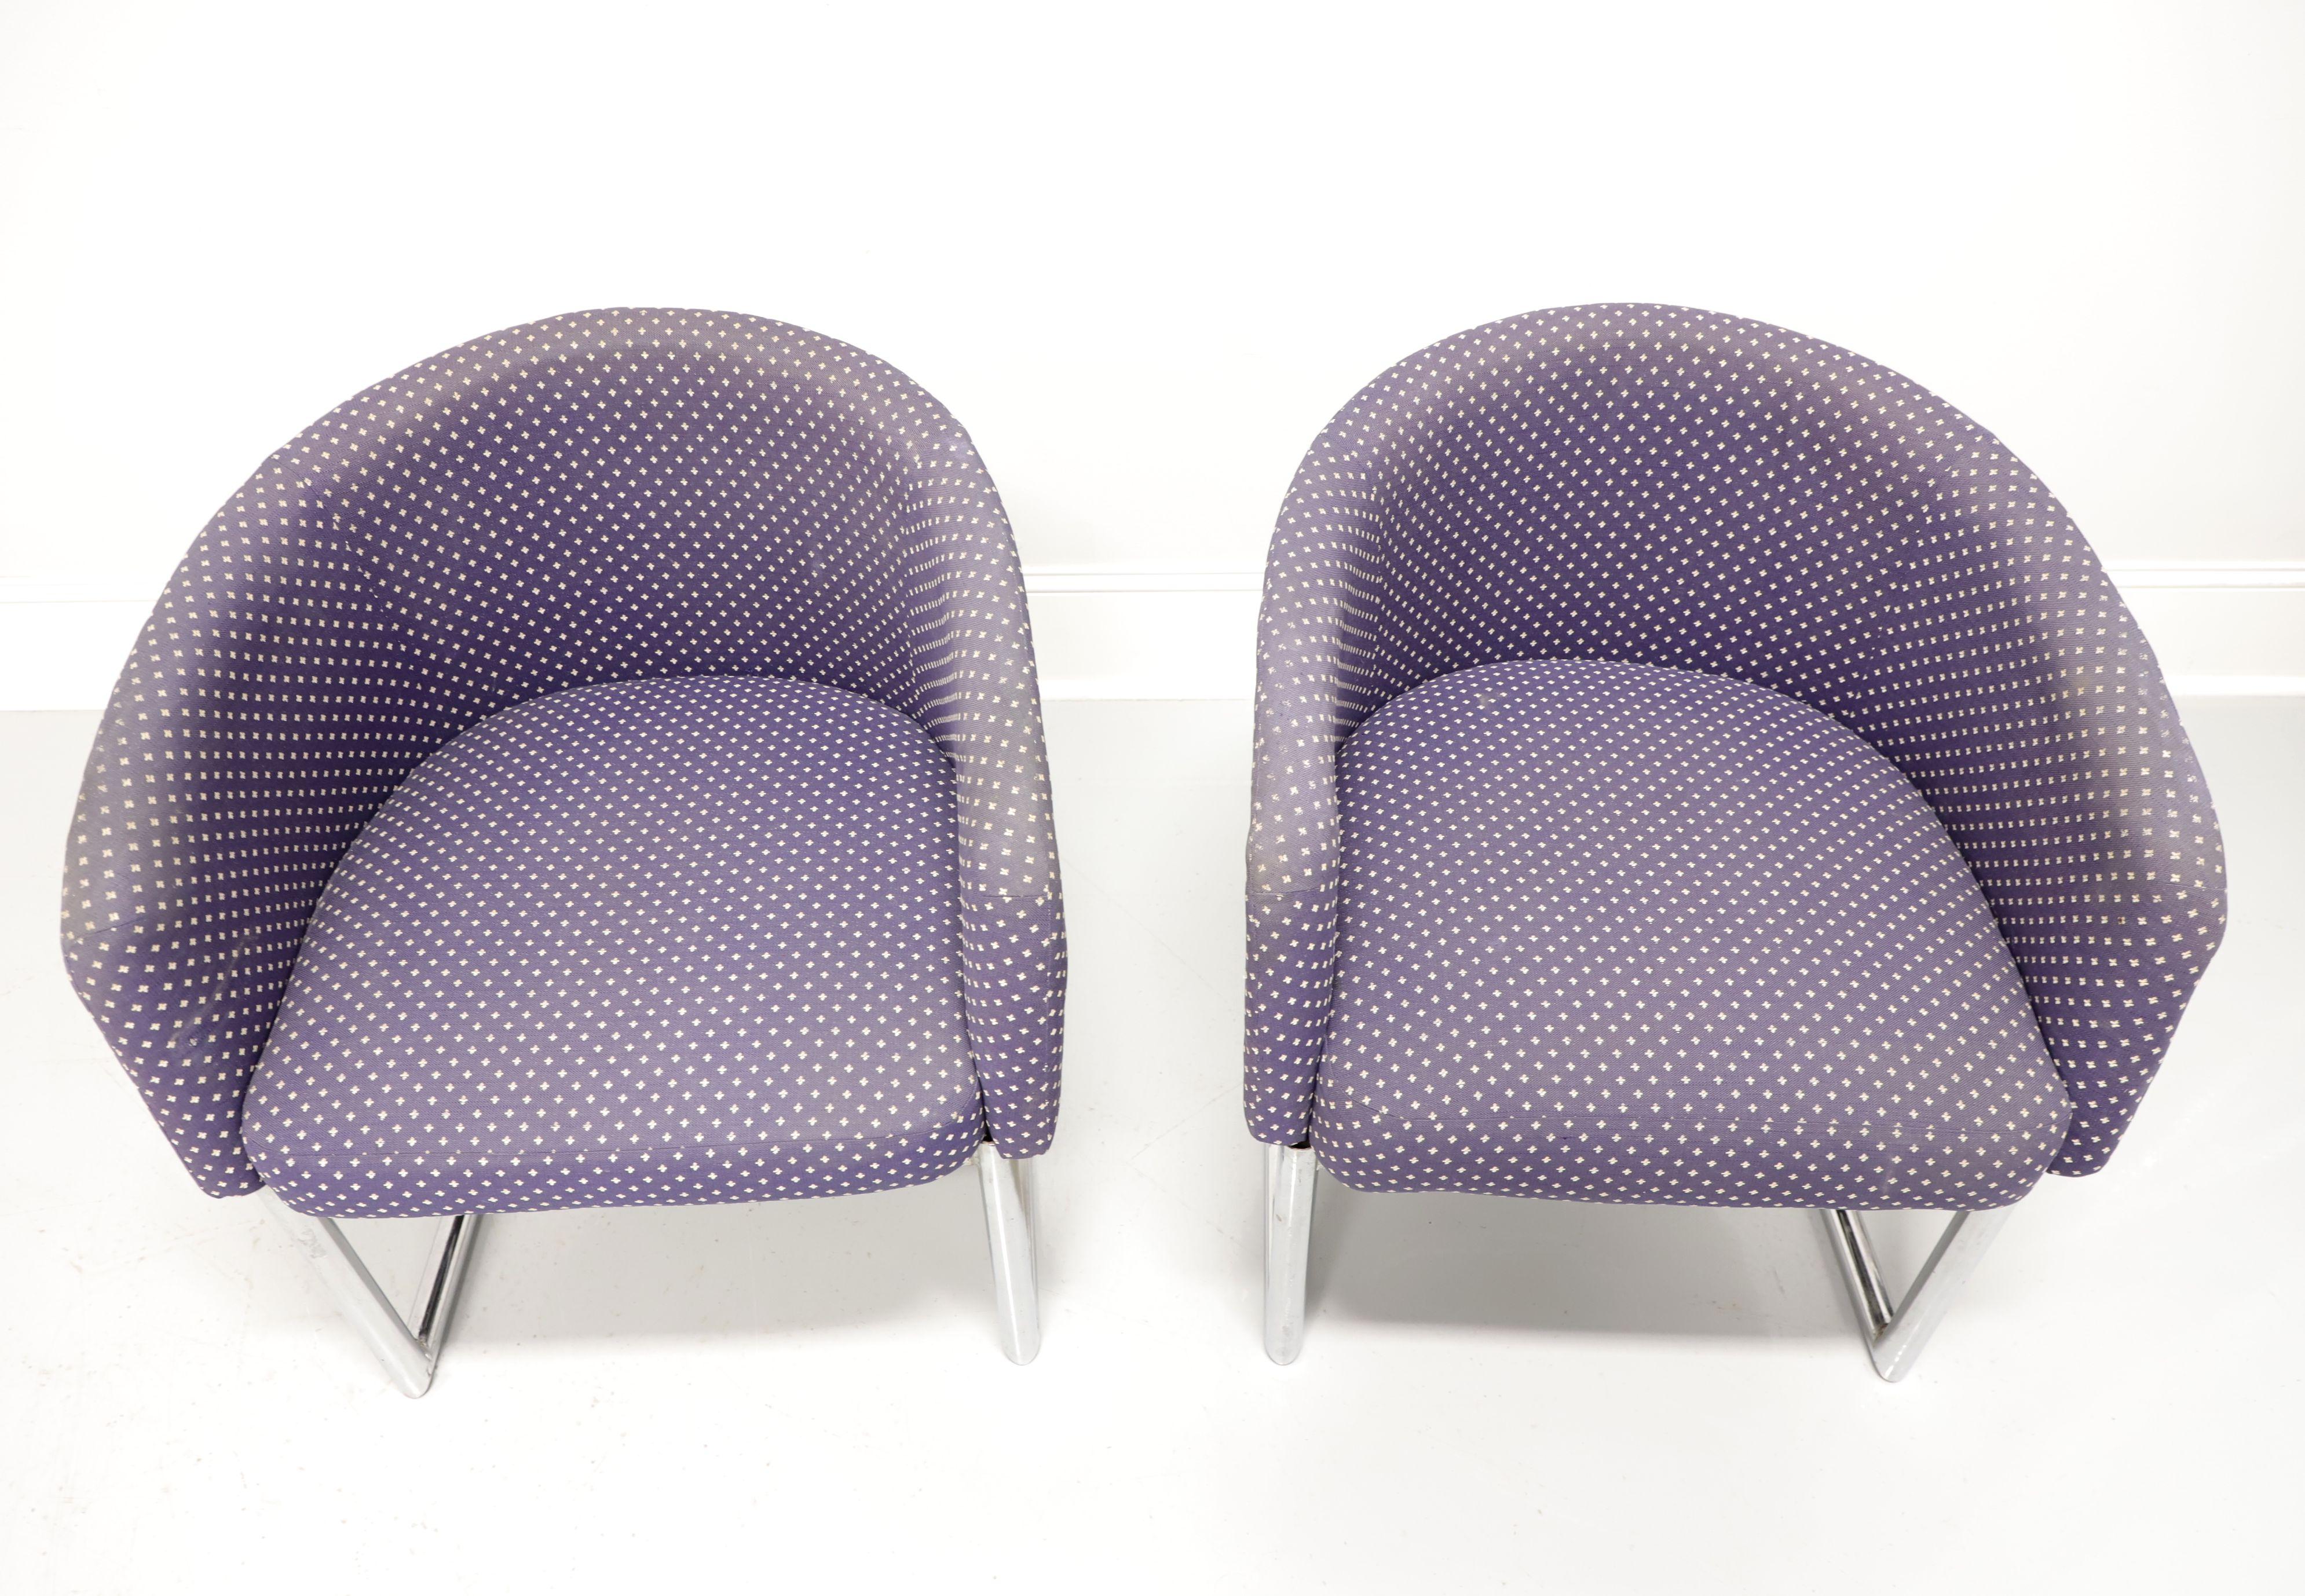 A pair of mid 20th century Contemporary style cantilever chairs, unbranded. Chrome frame, barrel back design, purplish blue & beige color fabric upholstered backs, arms and seats. Made in the USA, in the mid 20th Century.

Measures: Overall: 24.75